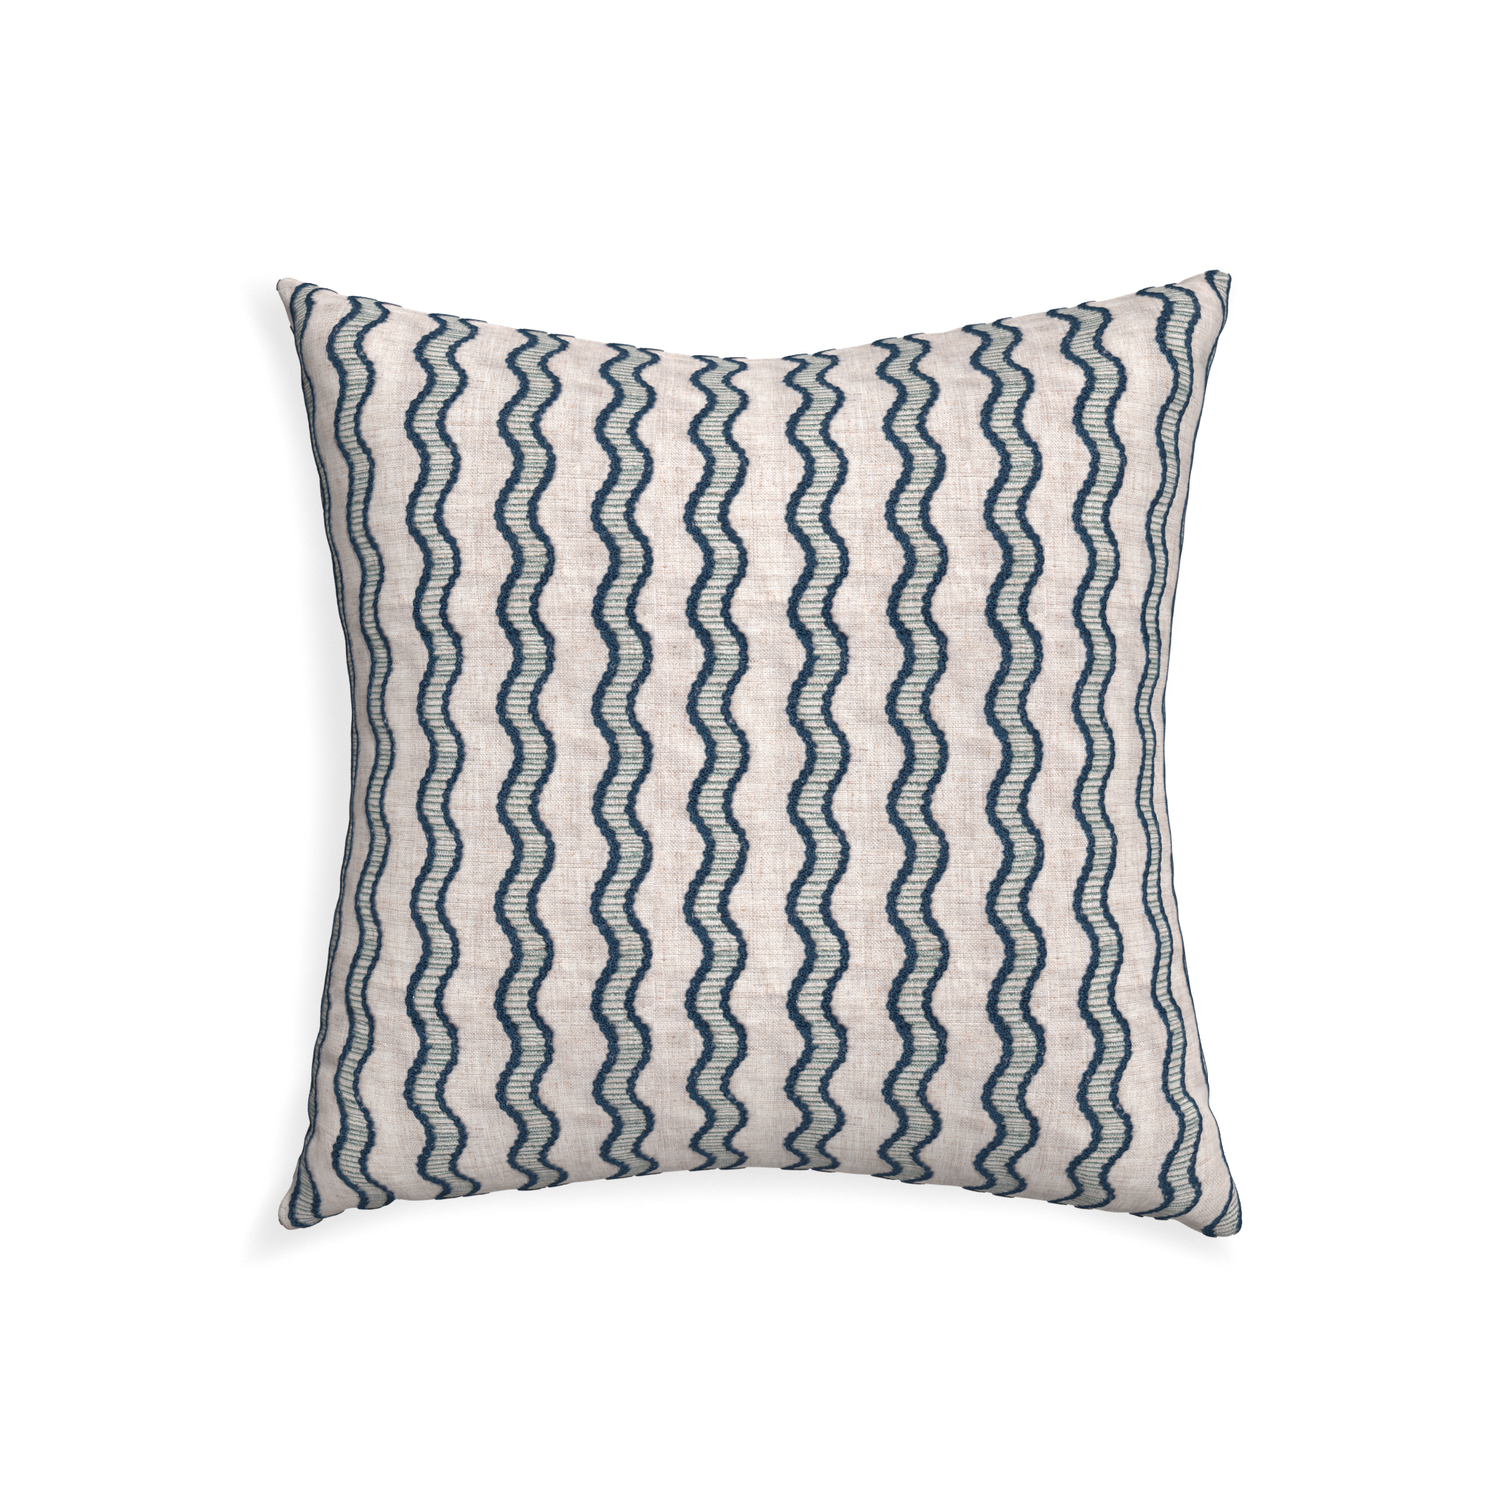 22-square beatrice custom embroidered wavepillow with none on white background